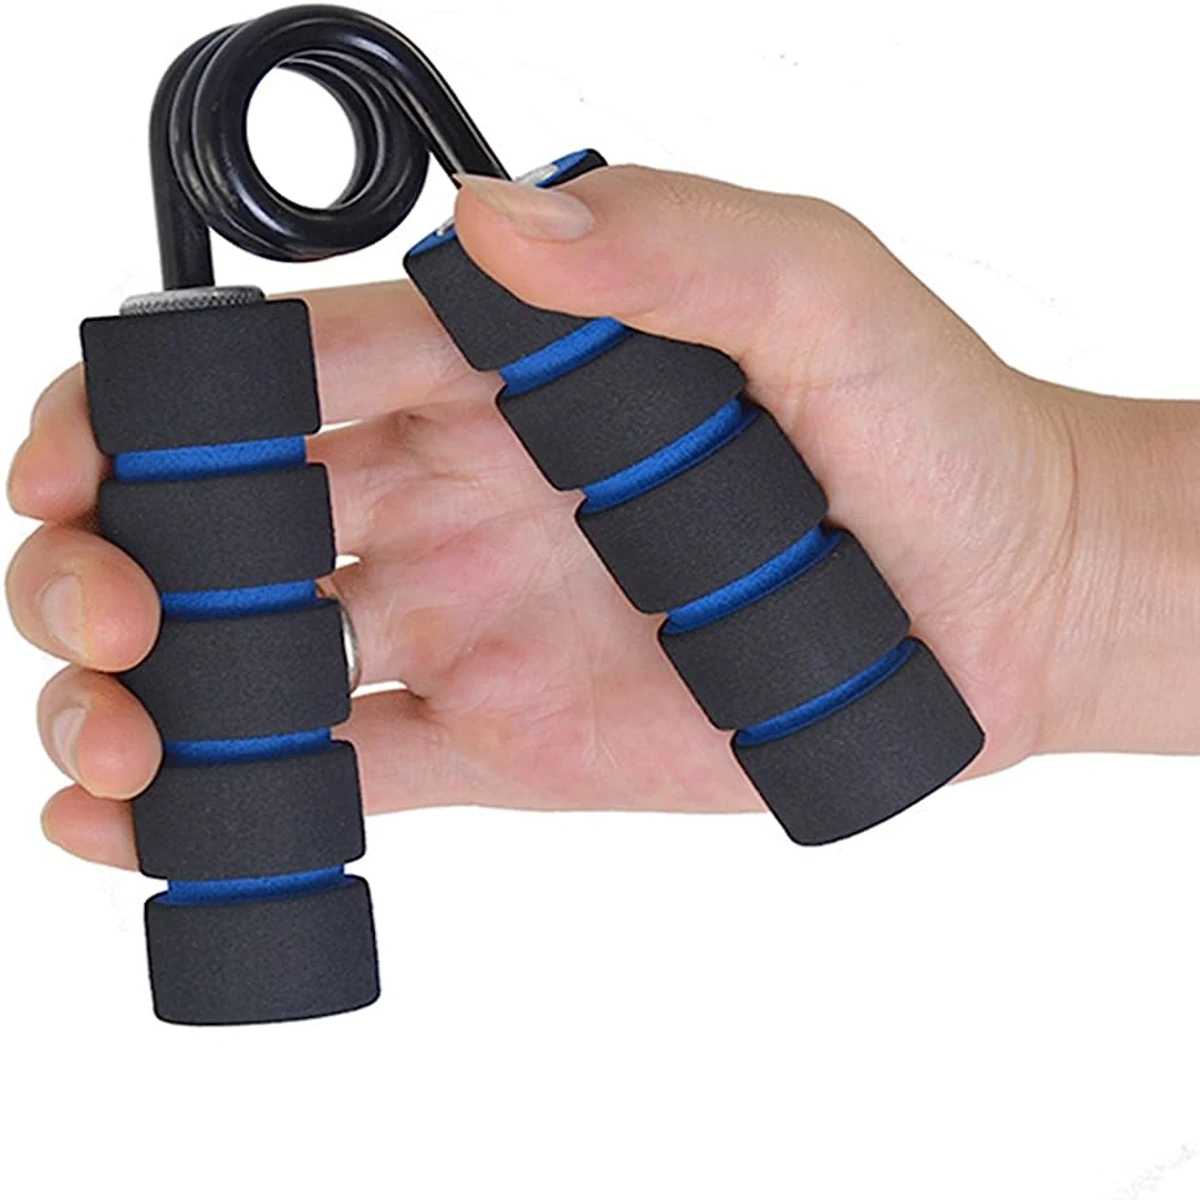 2 Piece Hand Grip and Wrist Strengthener - Resistance Metal Exerciser for Hand, arm and Fingers, Sponge Forearm Health Builder Gym Household Training Tools